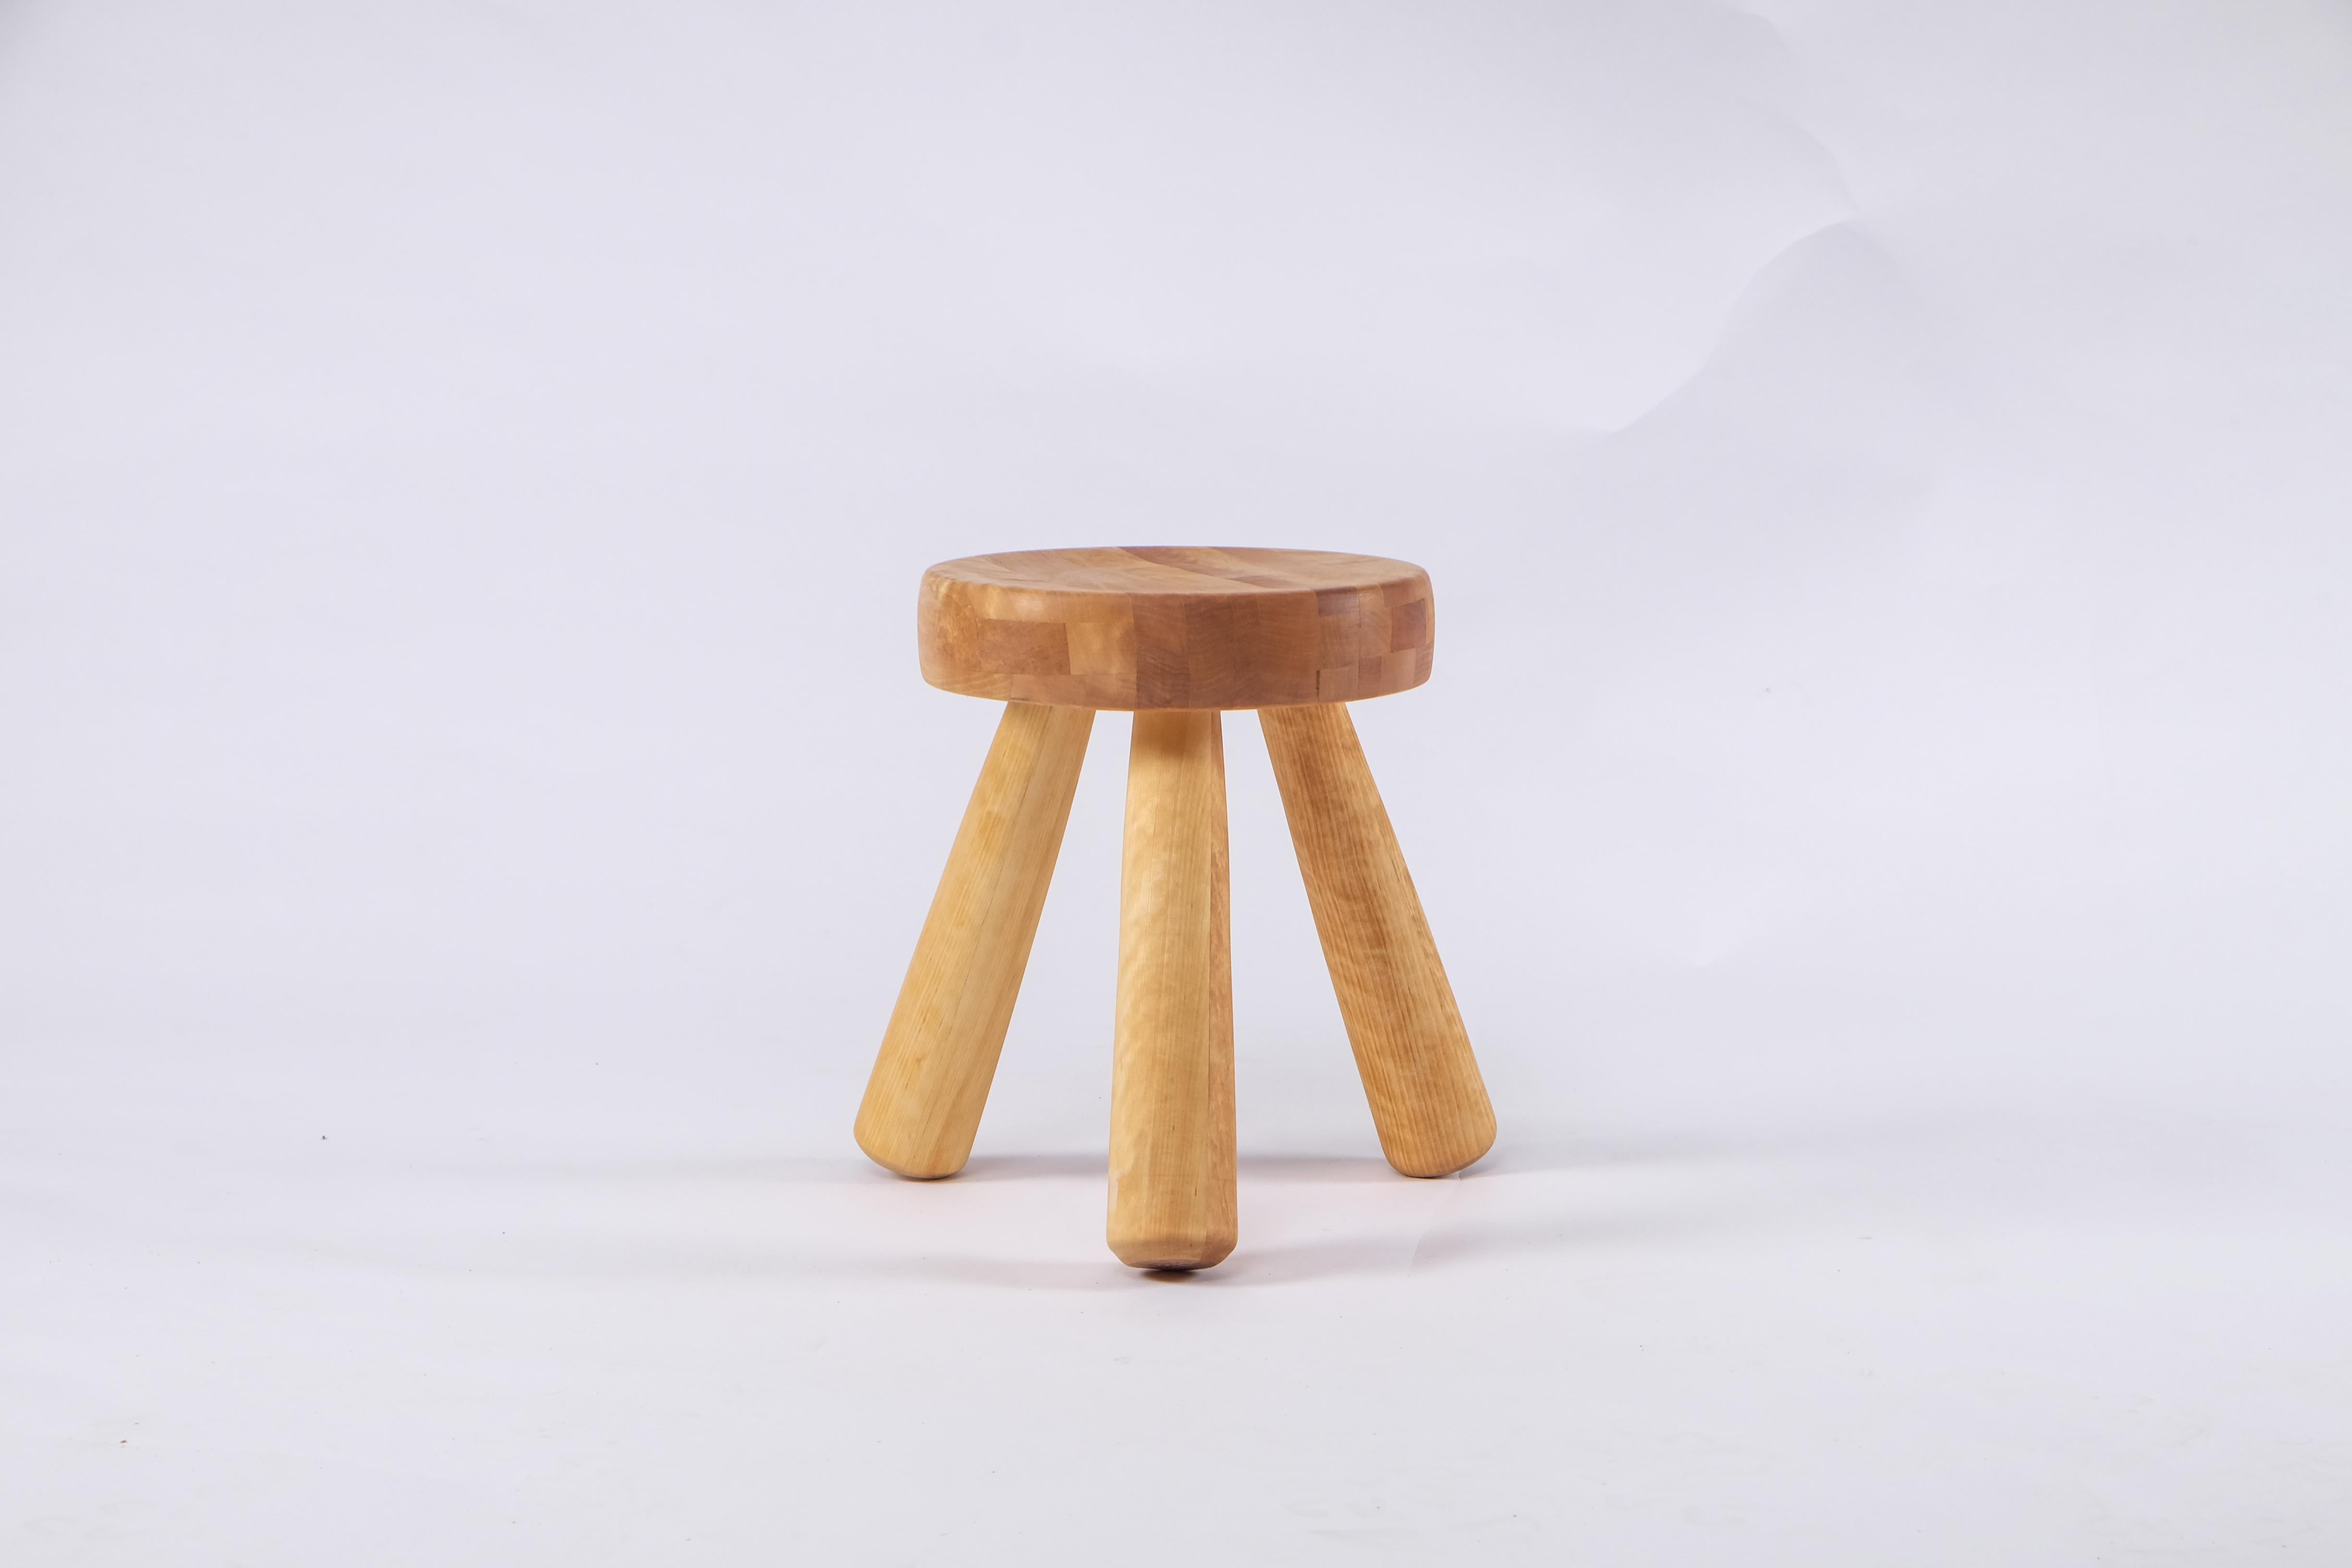 Stool, birch. Produced by Ingvar Hildingsson, Sweden. Signed.
Set of 2 available. Excellent condition.